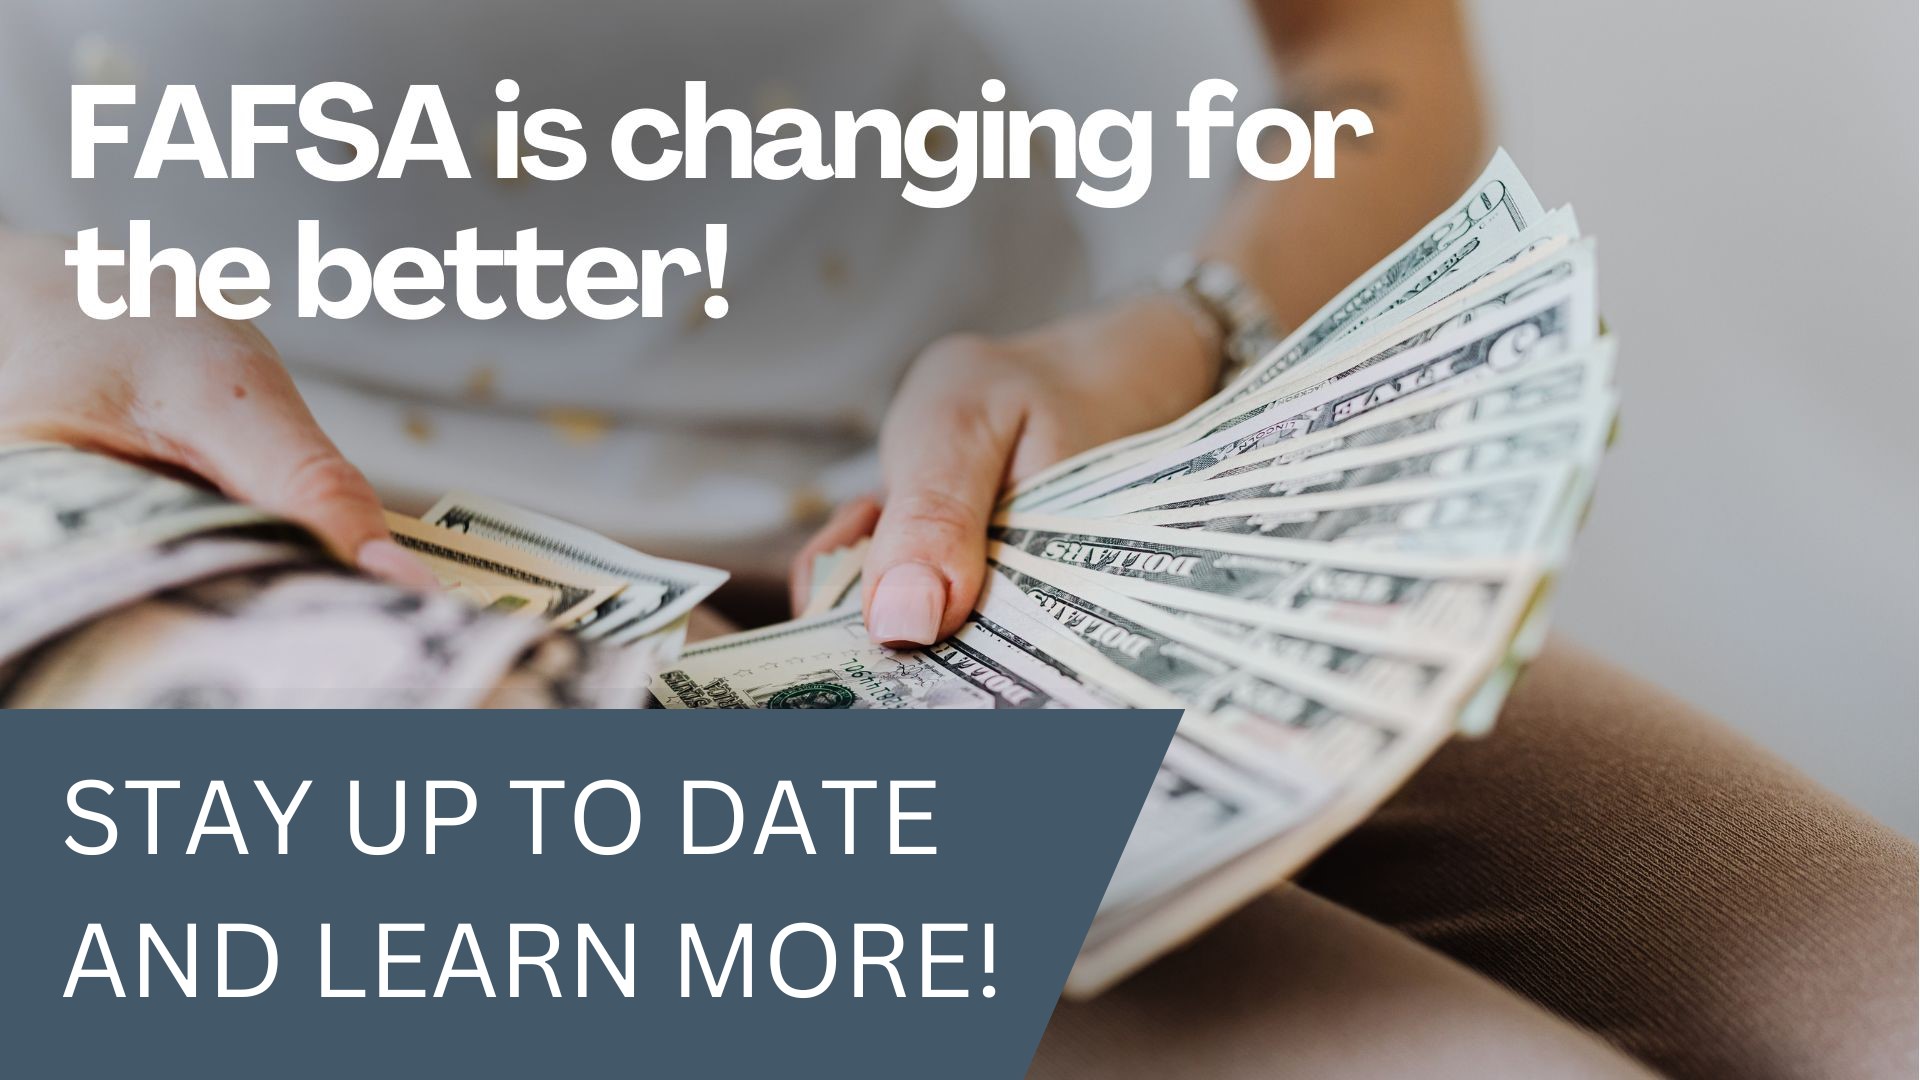 FAFSA is changing for the better! Stay up to date and learn more!